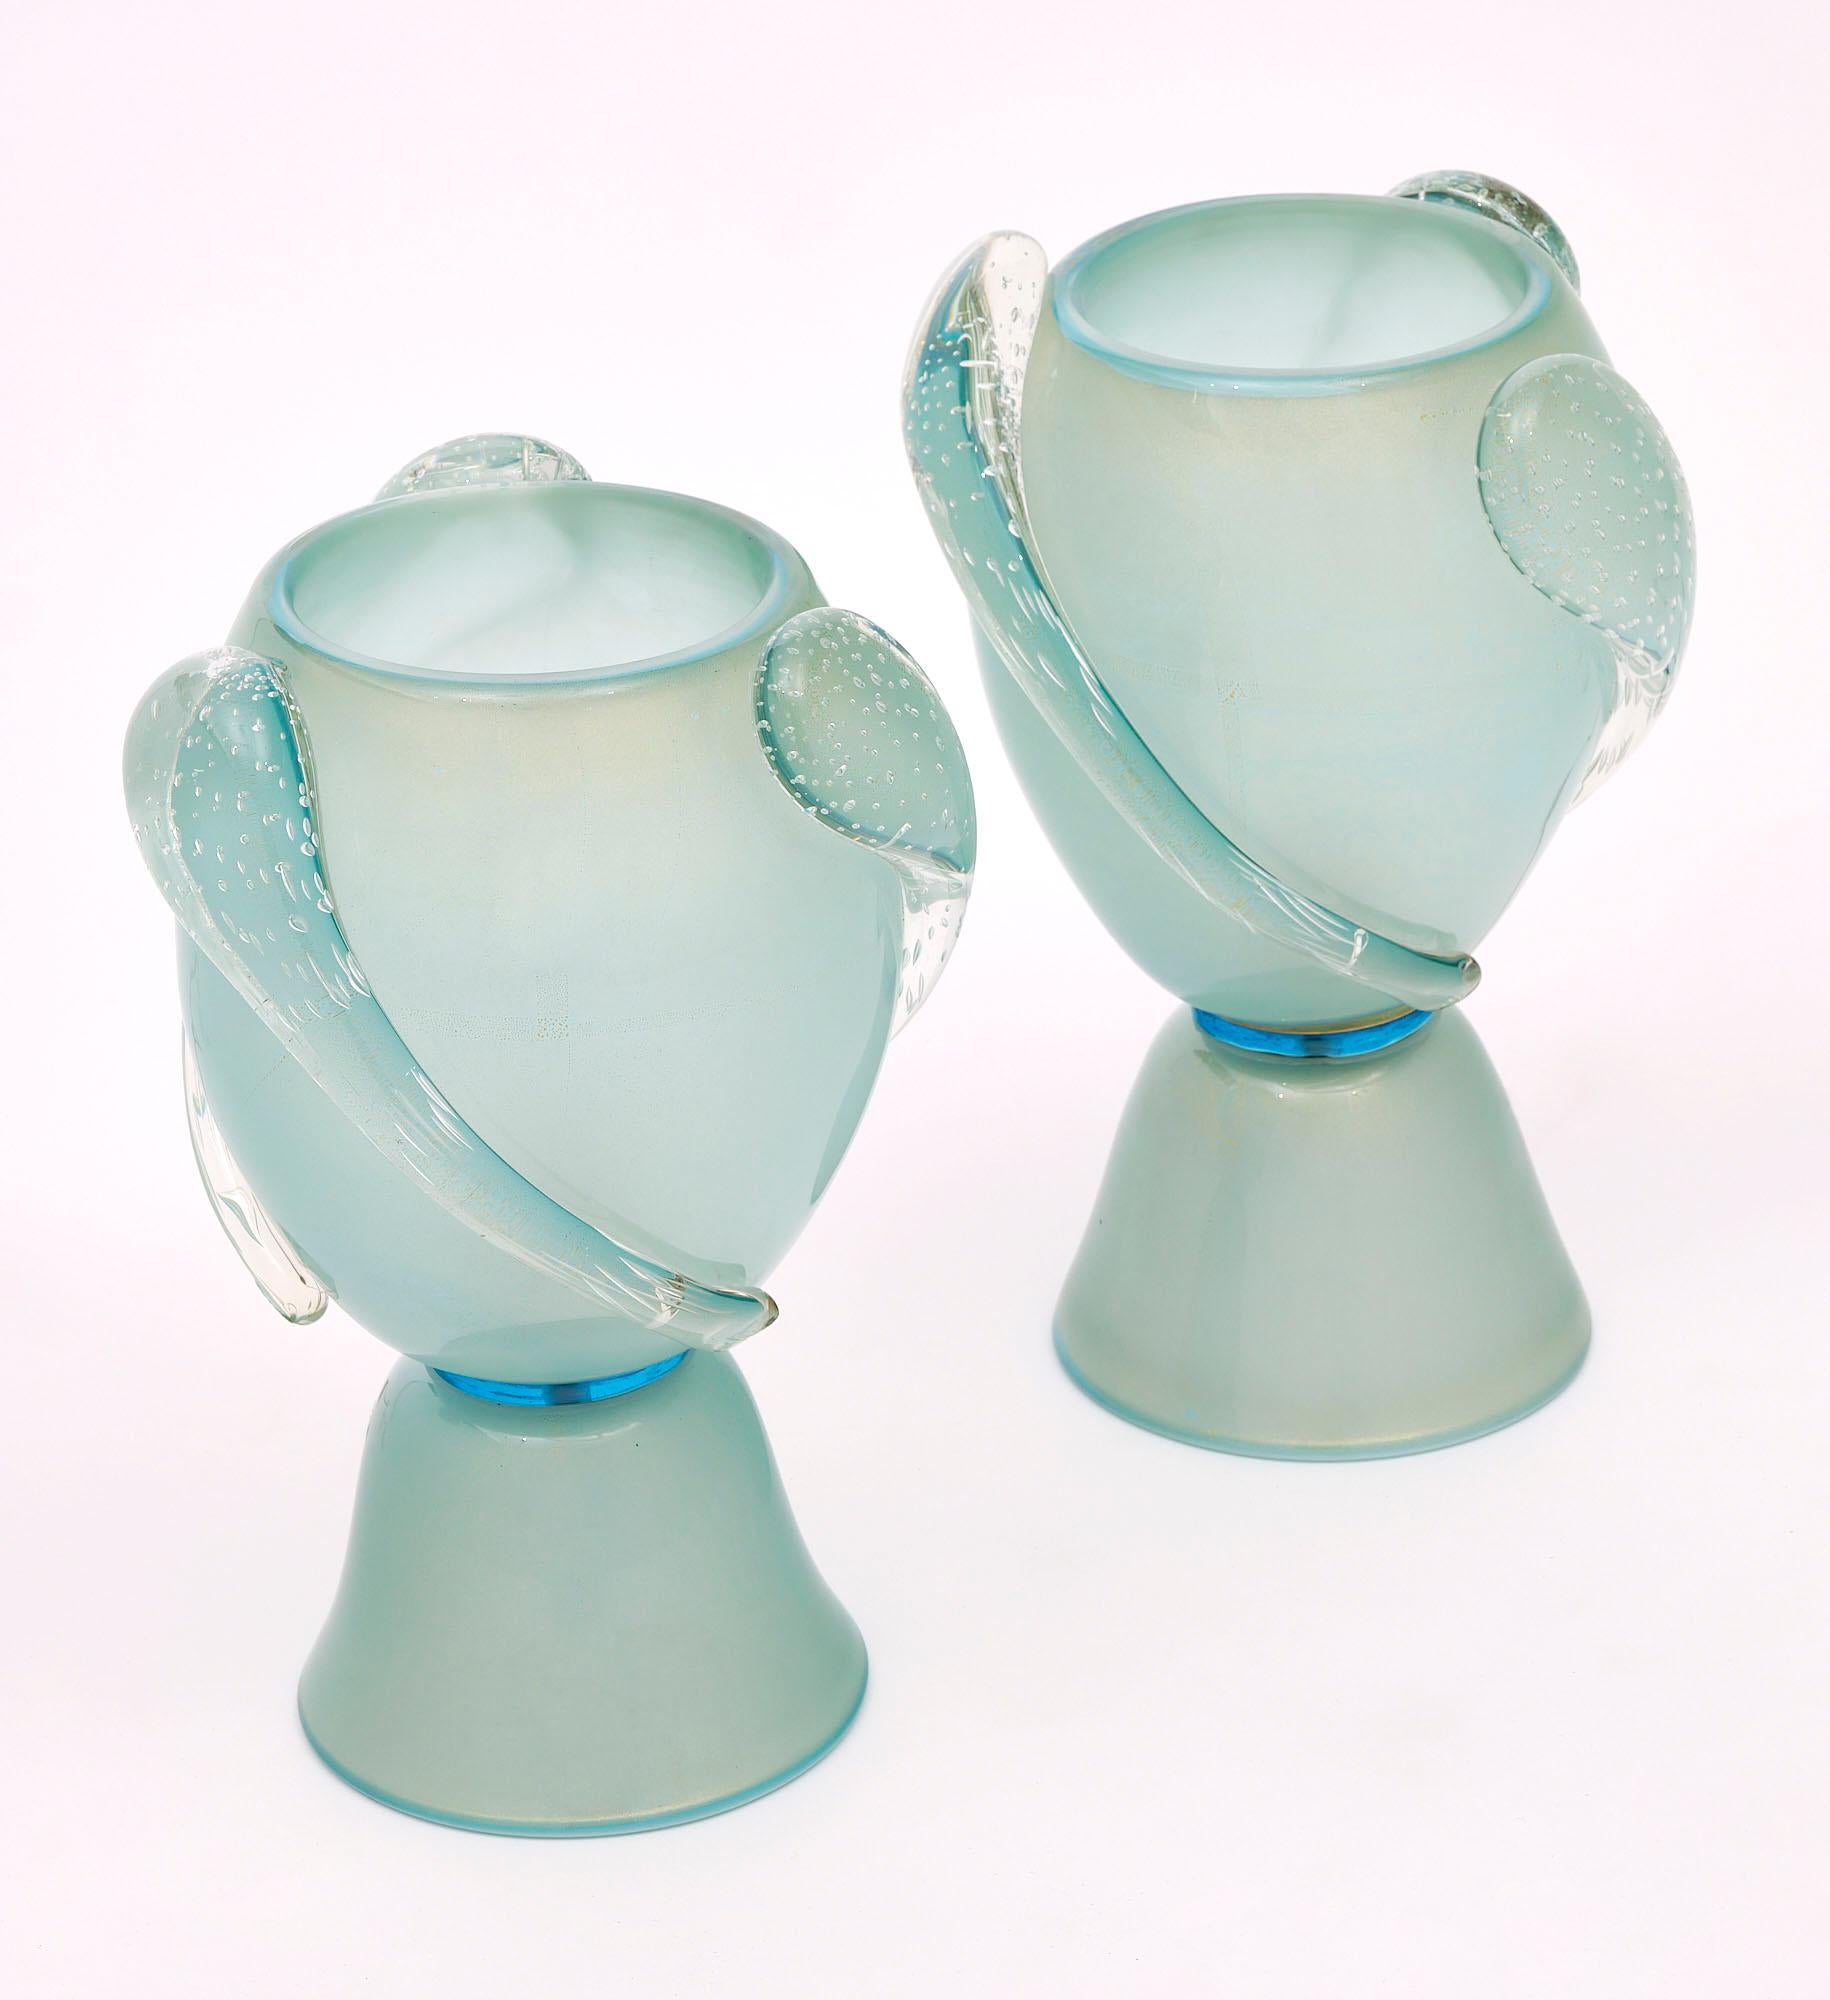 Pair of lamps from the island of Murano made of hand-blown glass in a light blue color with an aquamarine ring. This pair has been newly wired to fit US standards.